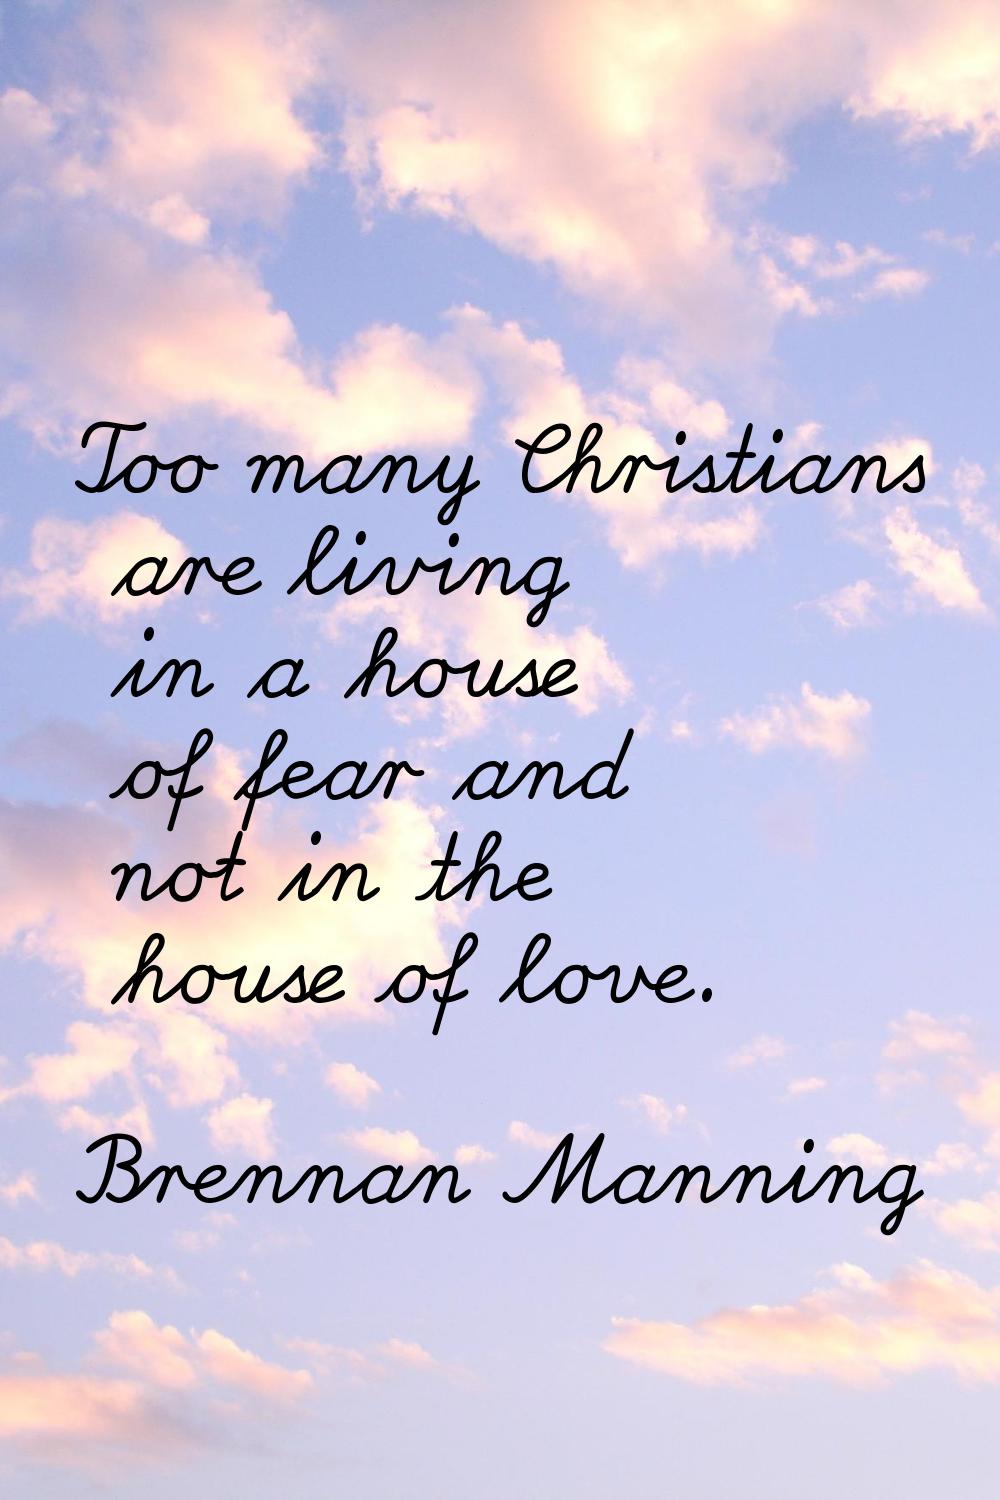 Too many Christians are living in a house of fear and not in the house of love.